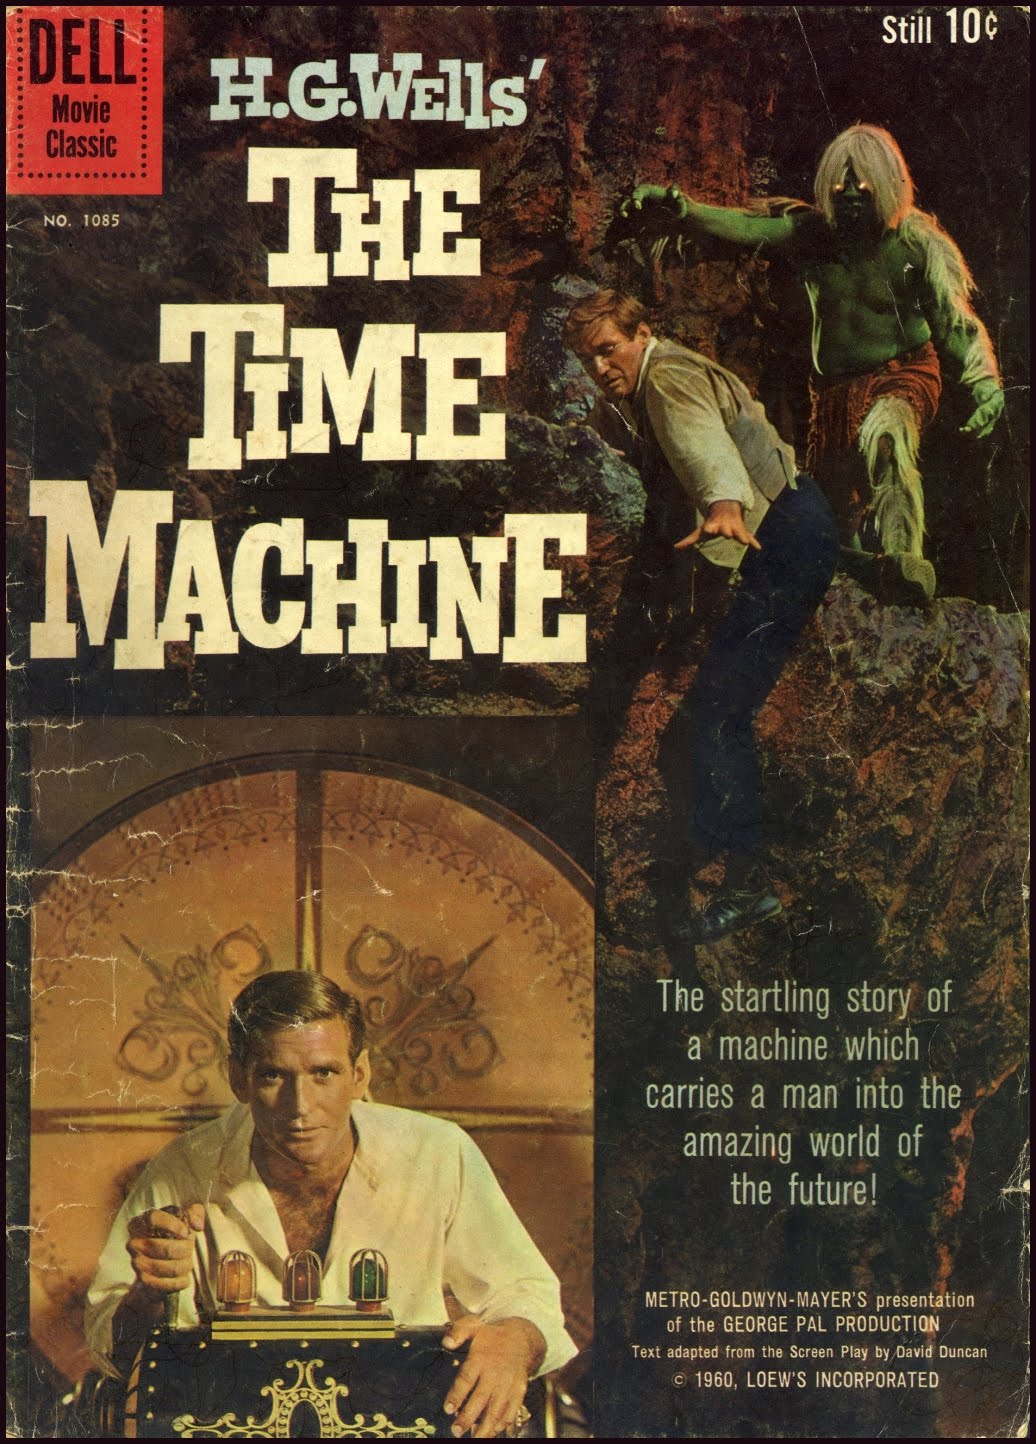 Amazing The Time Machine (1960) Pictures & Backgrounds